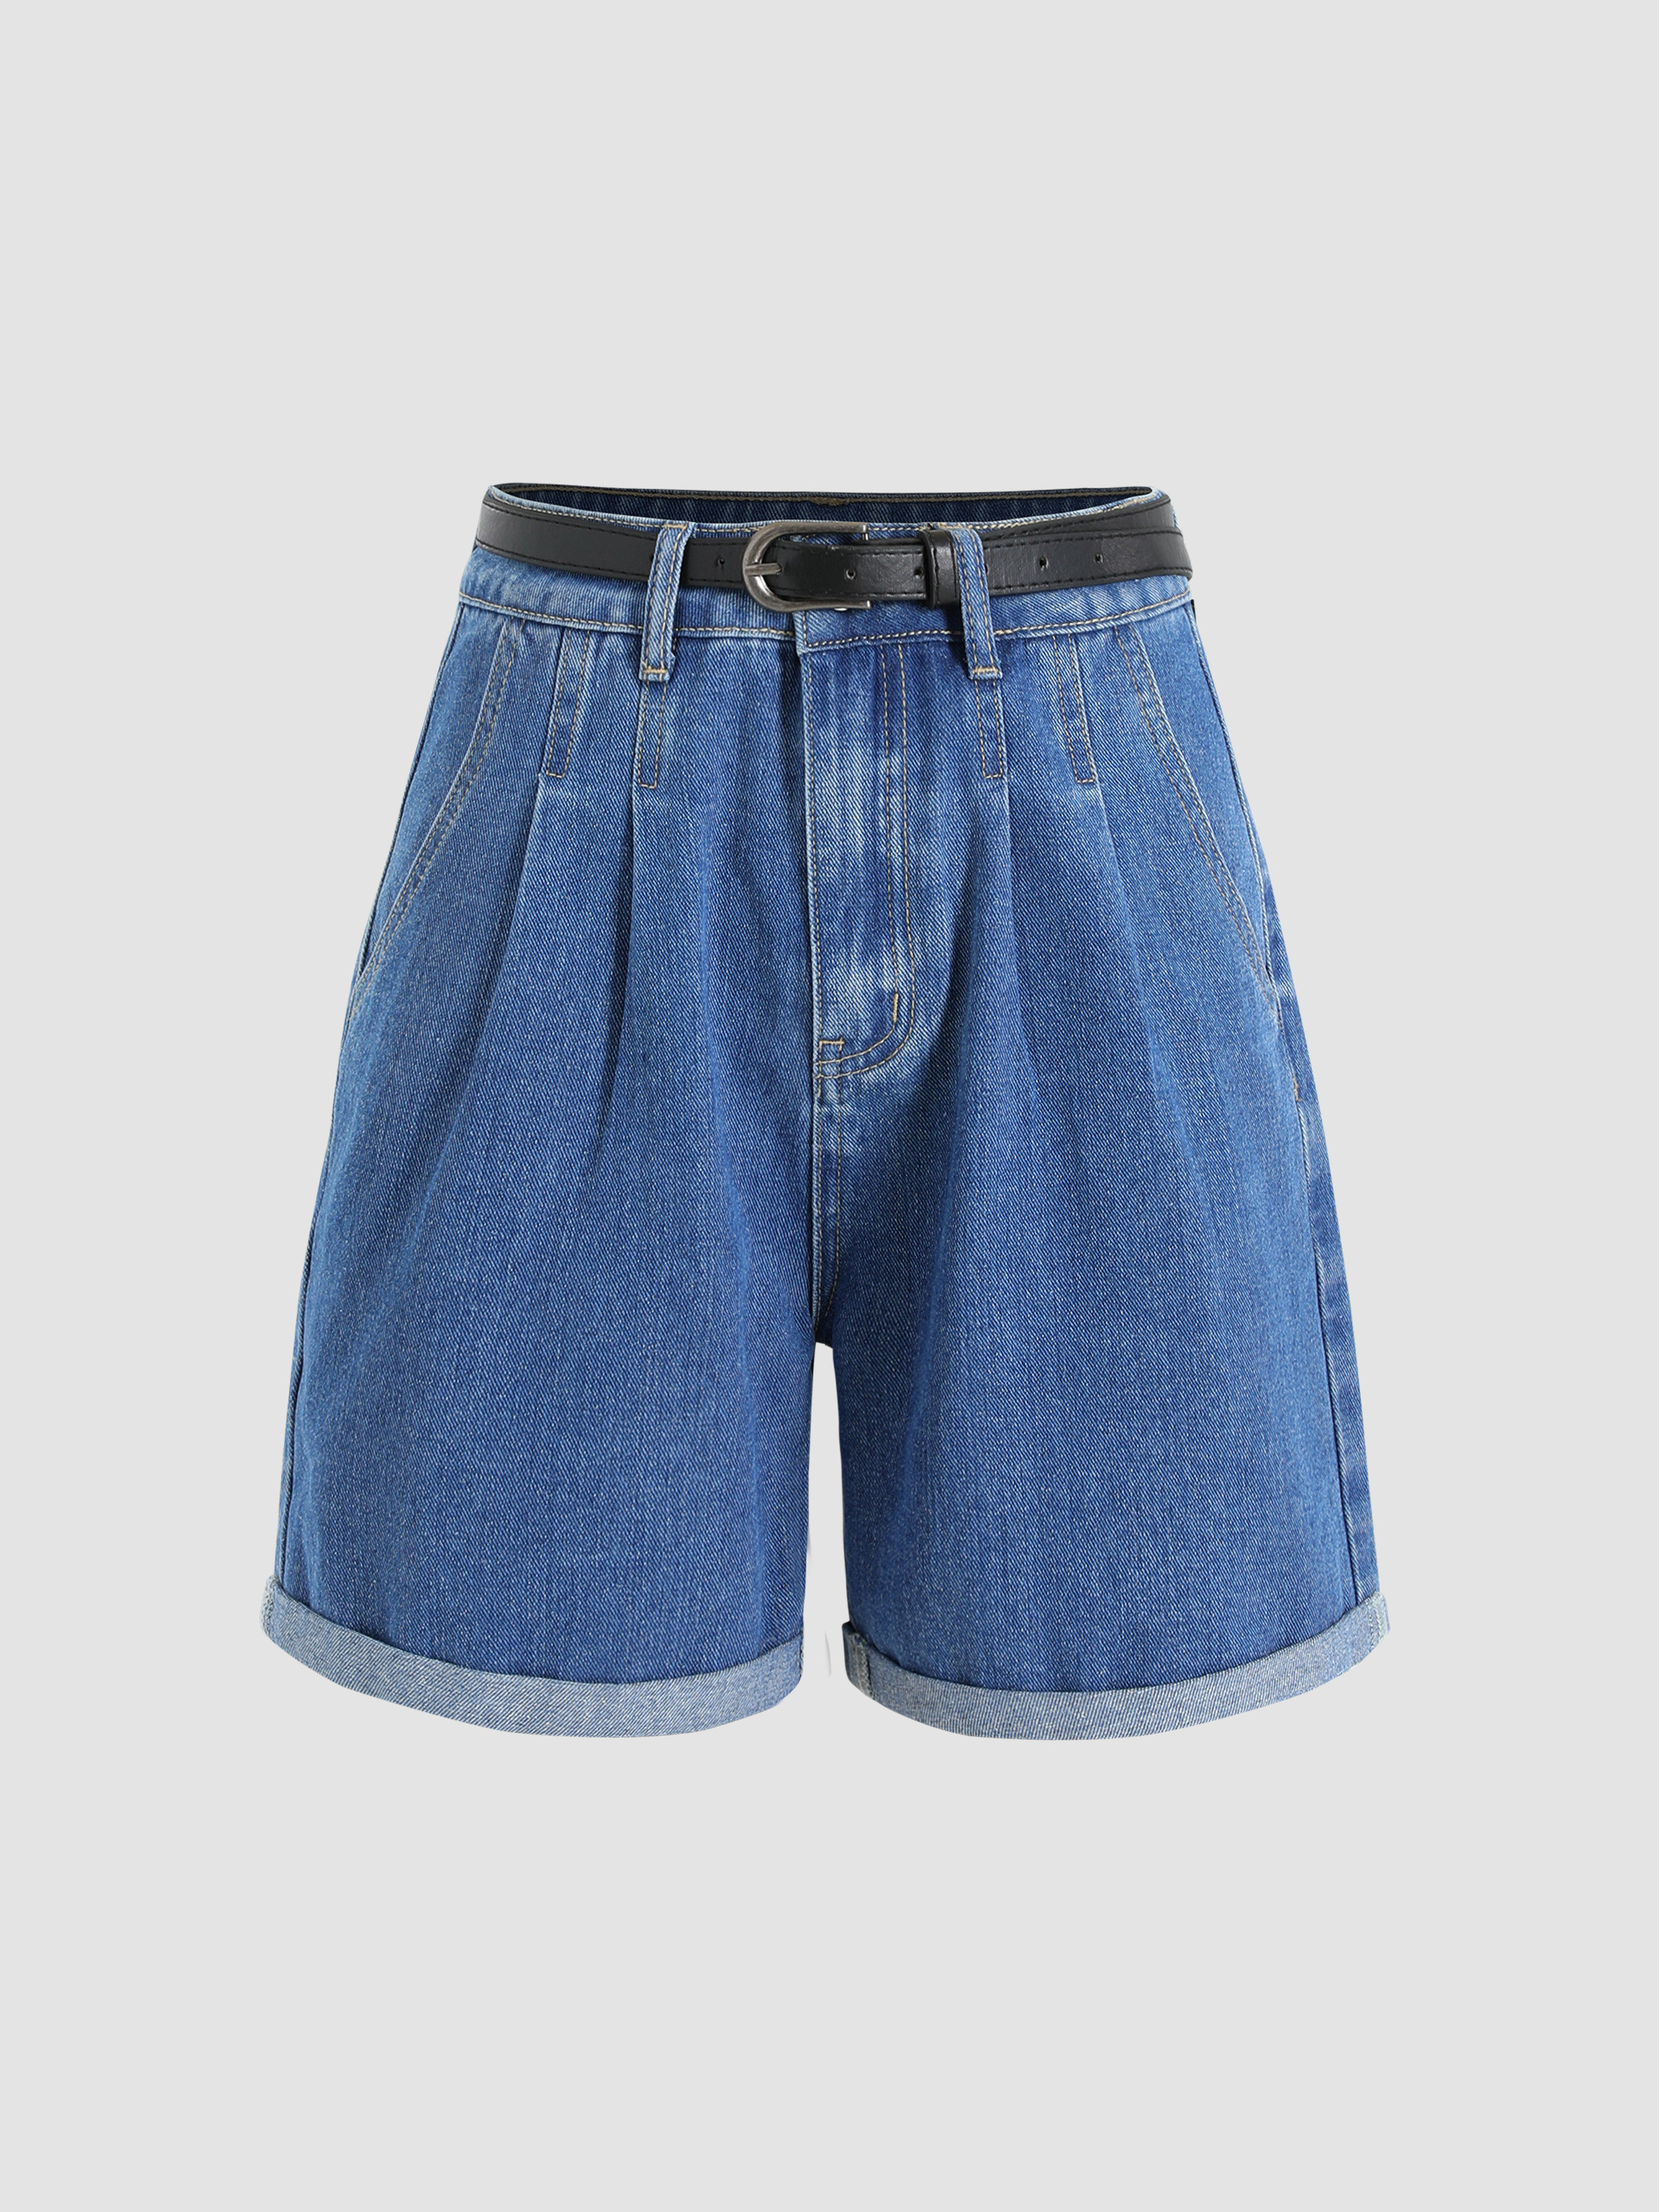 Denim Shorts With Belt For School Daily Casual Exhibition Vacation